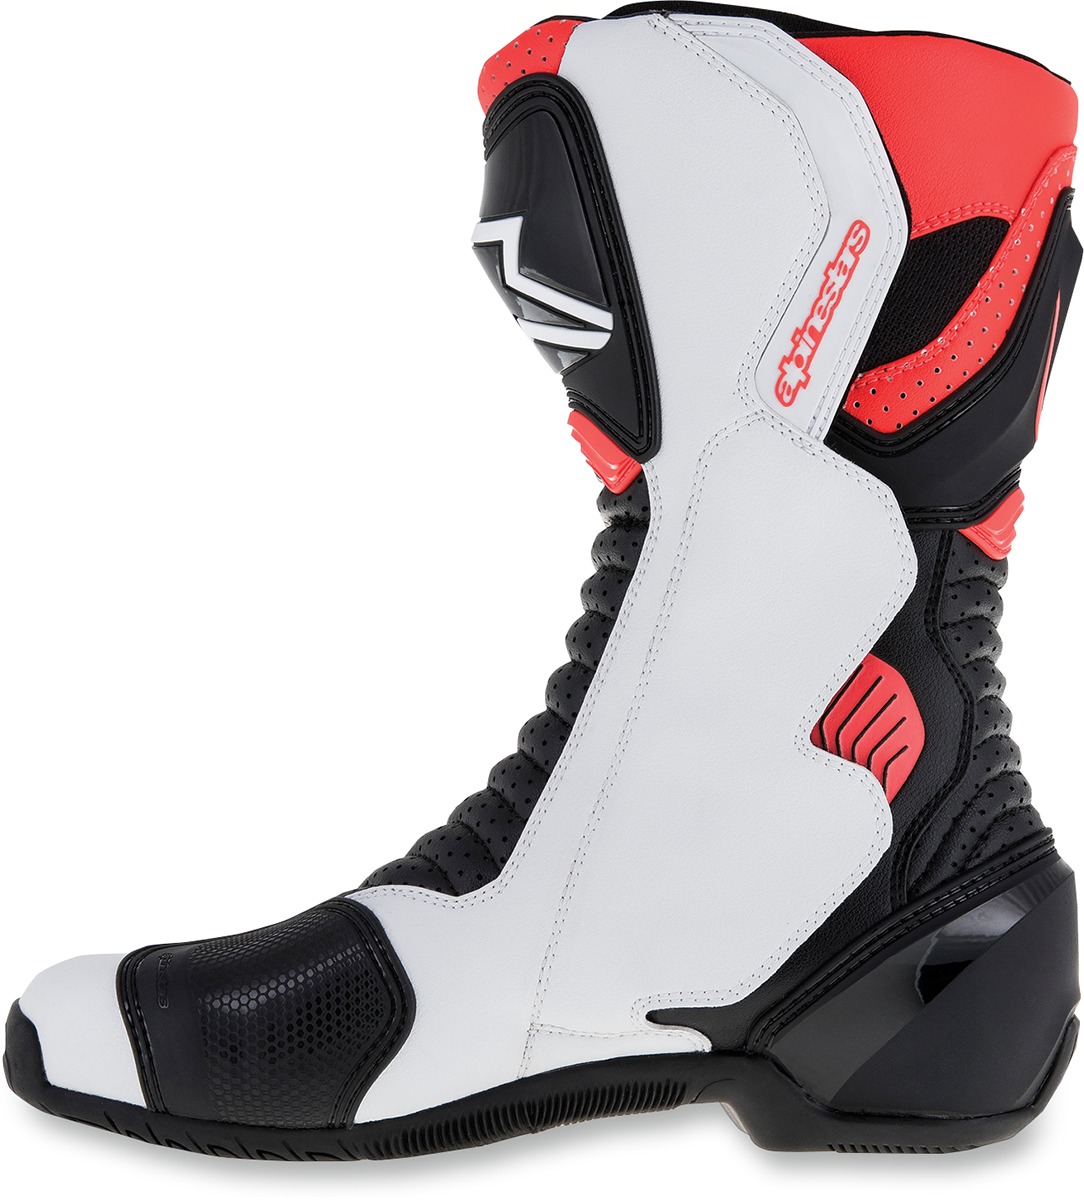 SMX-6v2 Vented Street Riding Boots Black/Red/White US 5 - Click Image to Close